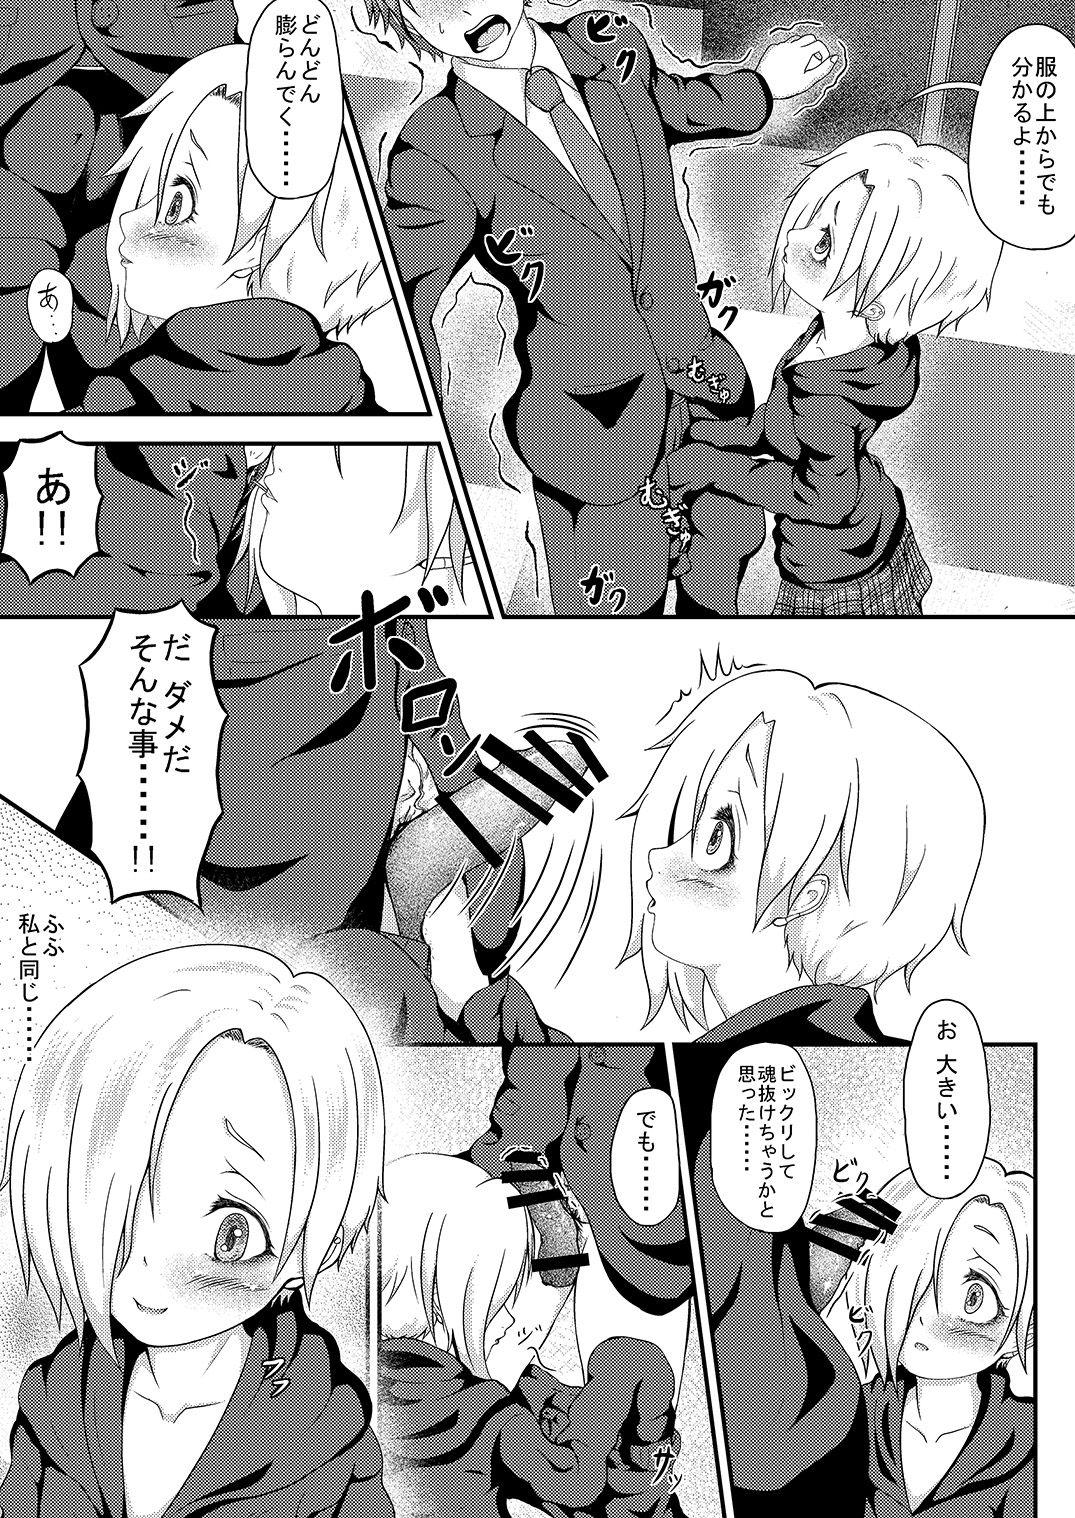 Dicks The H-aunting of Koume-chan - The idolmaster Mamada - Page 7